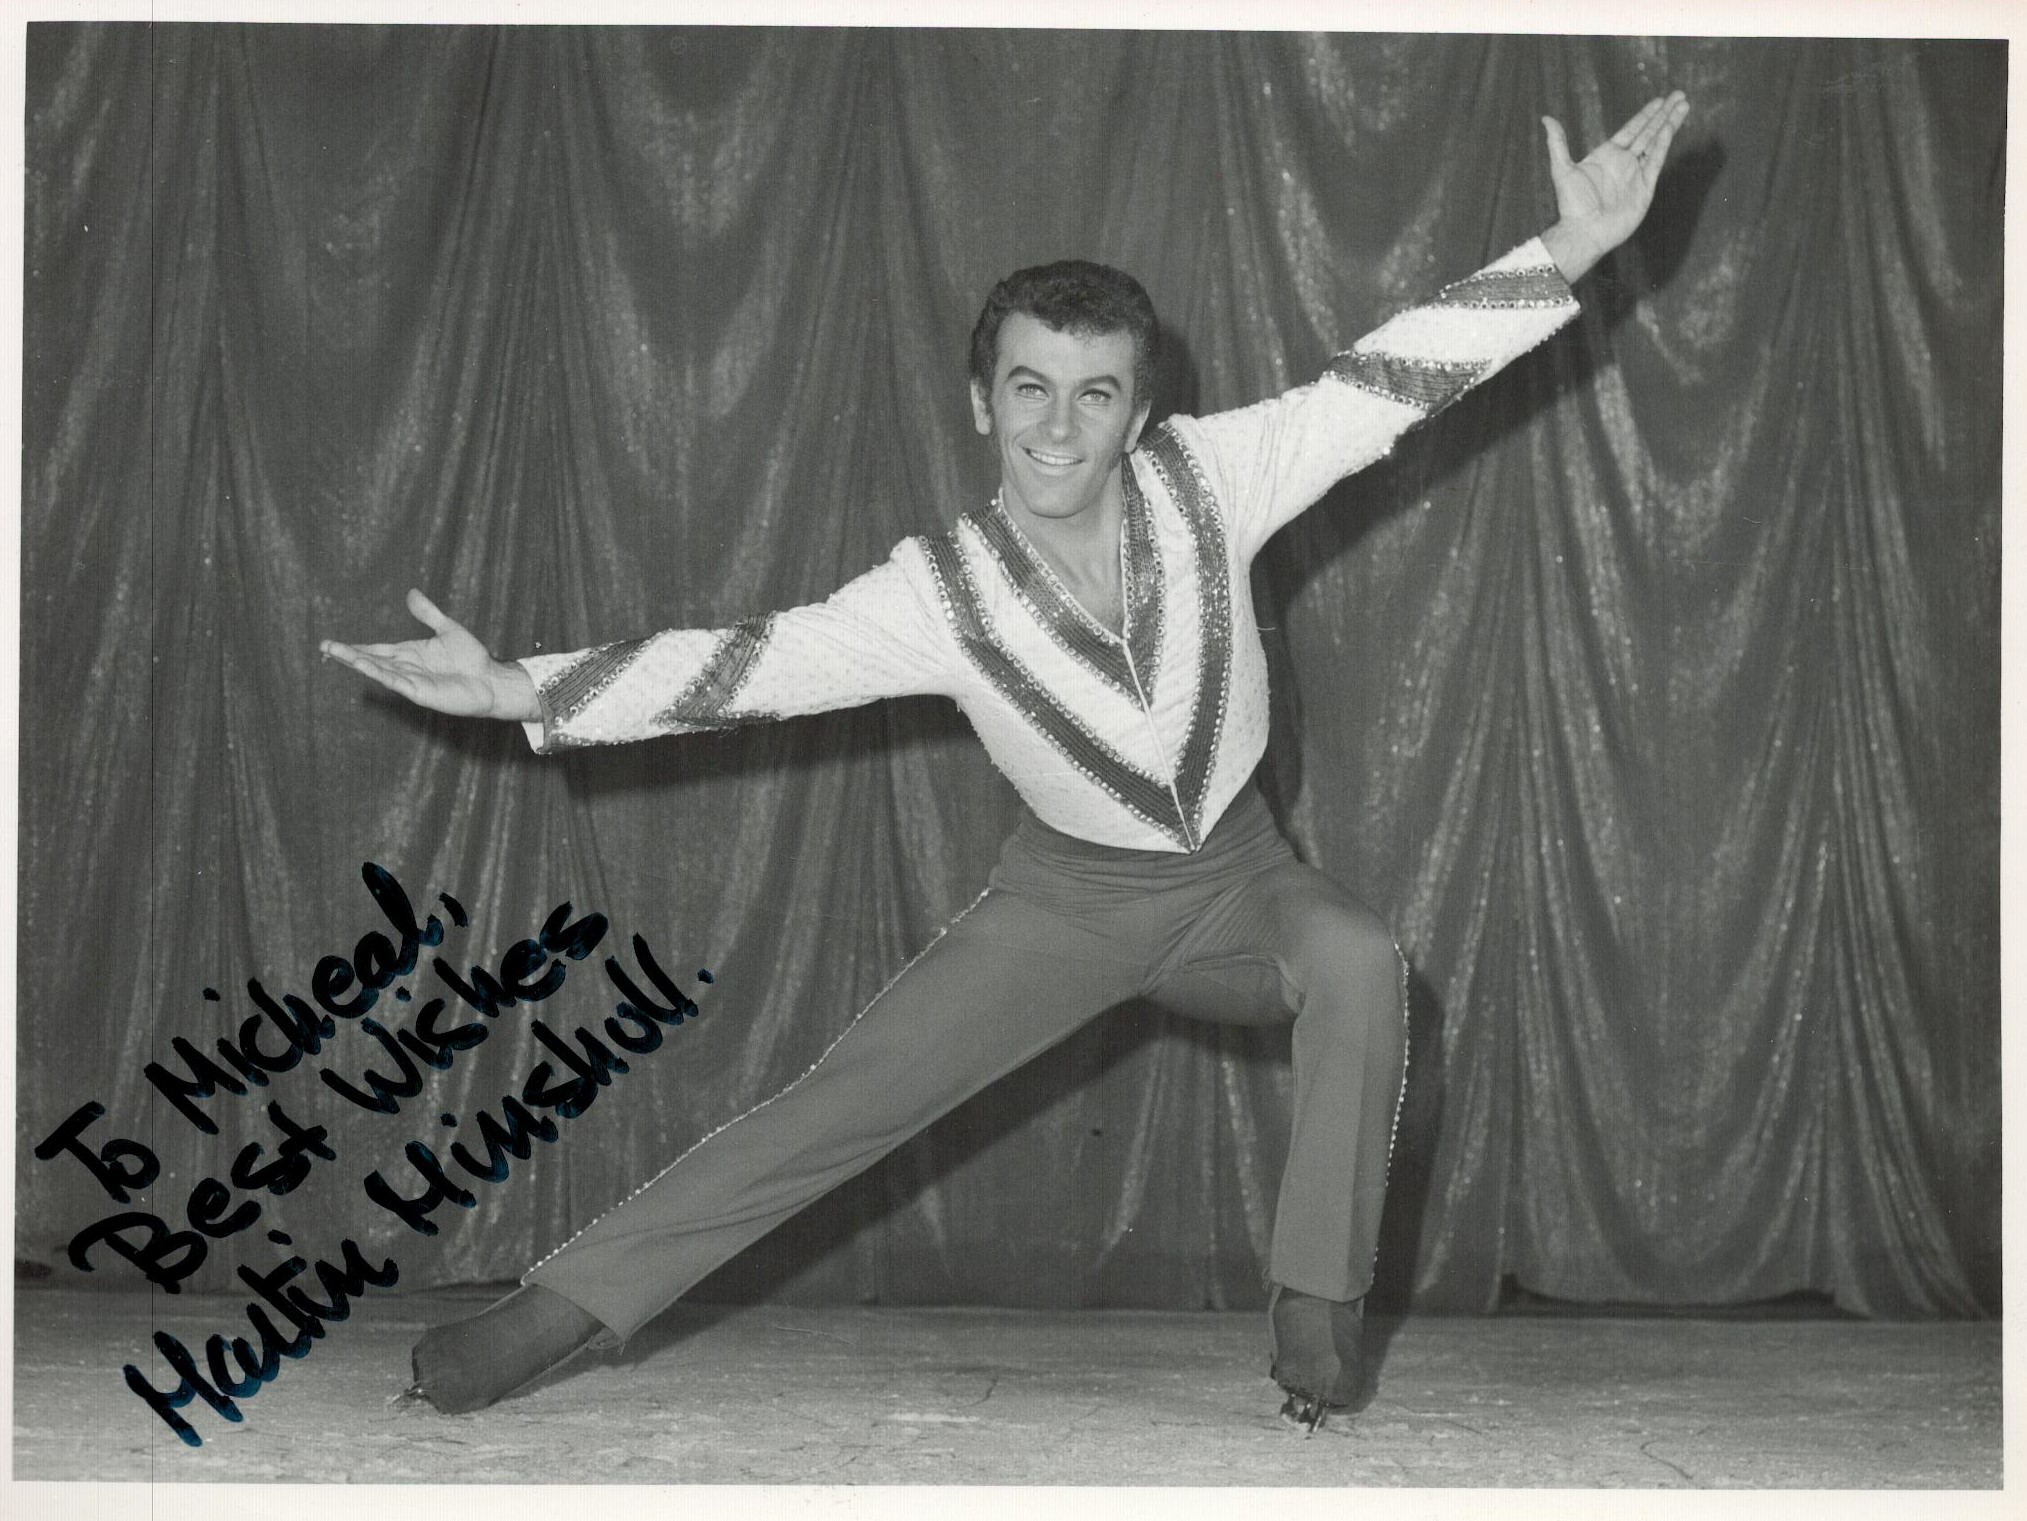 Ice Skater, Martin Minshull signed vintage 7x5 black and white photograph dedicated to Michael,